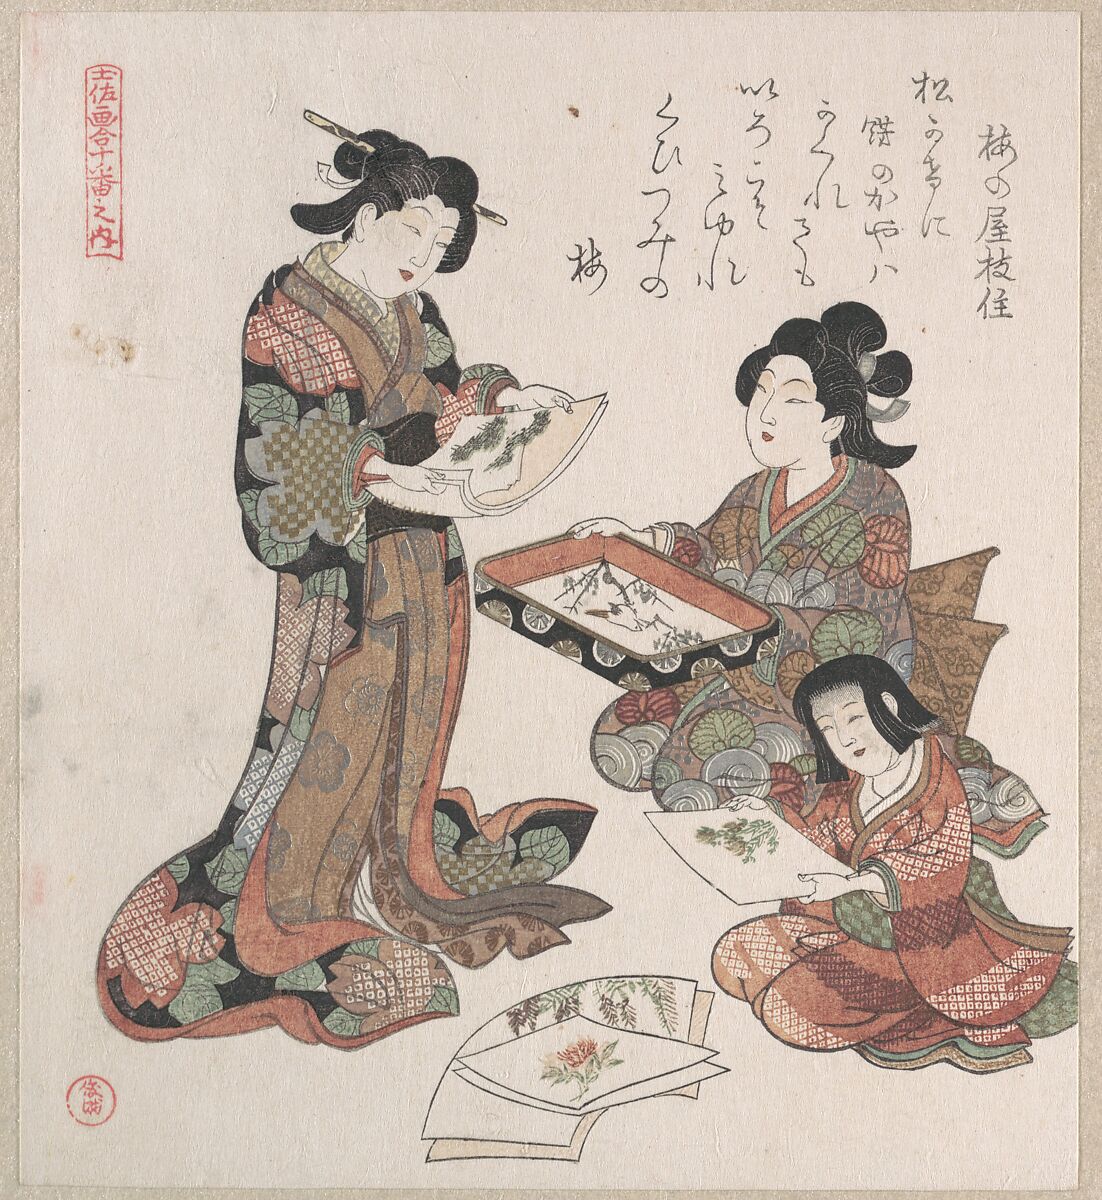 Two Women and a Girl Looking at Paintings, Kubo Shunman (Japanese, 1757–1820) (?), Part of an album of woodblock prints (surimono); ink and color on paper, Japan 